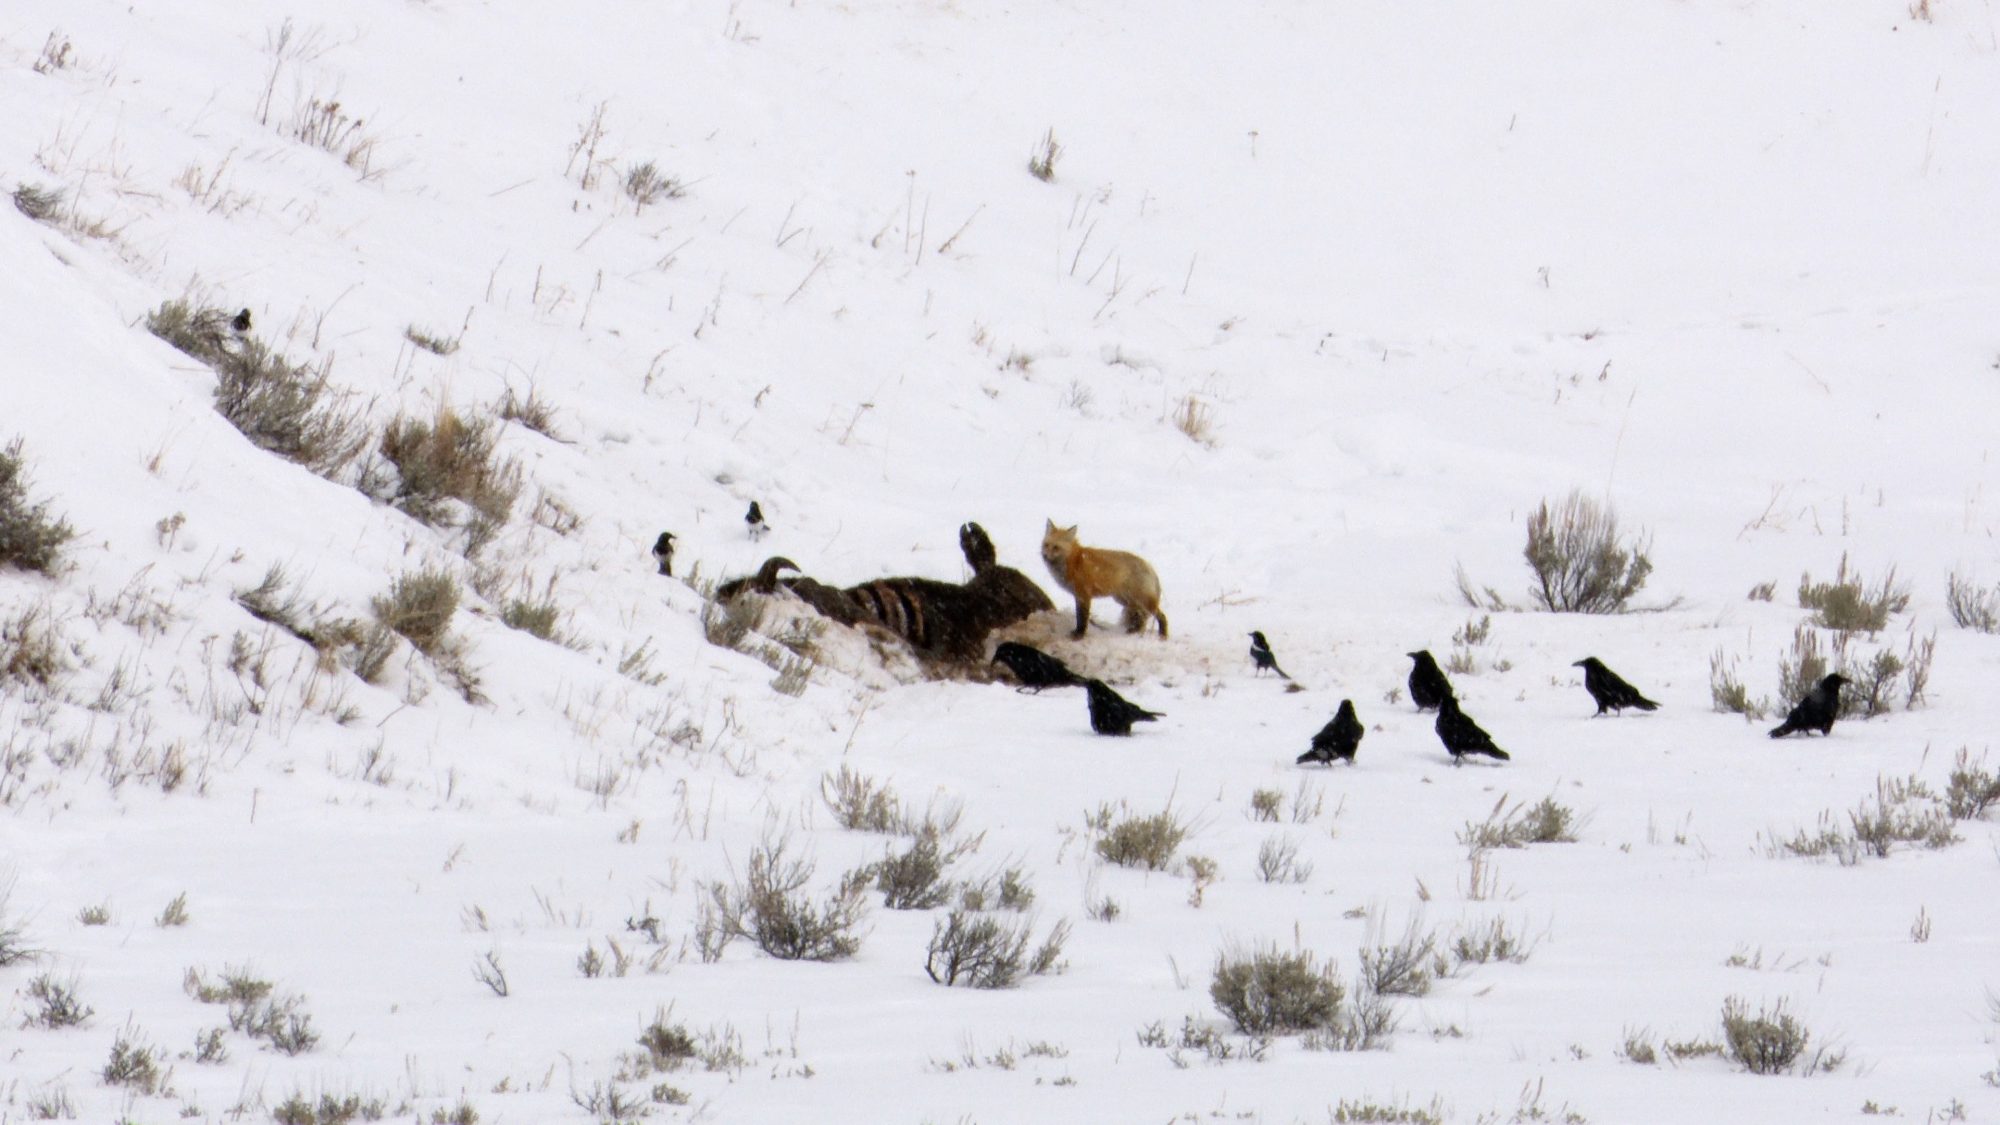 Red Fox on a Bison carcass – Yellowstone 2019